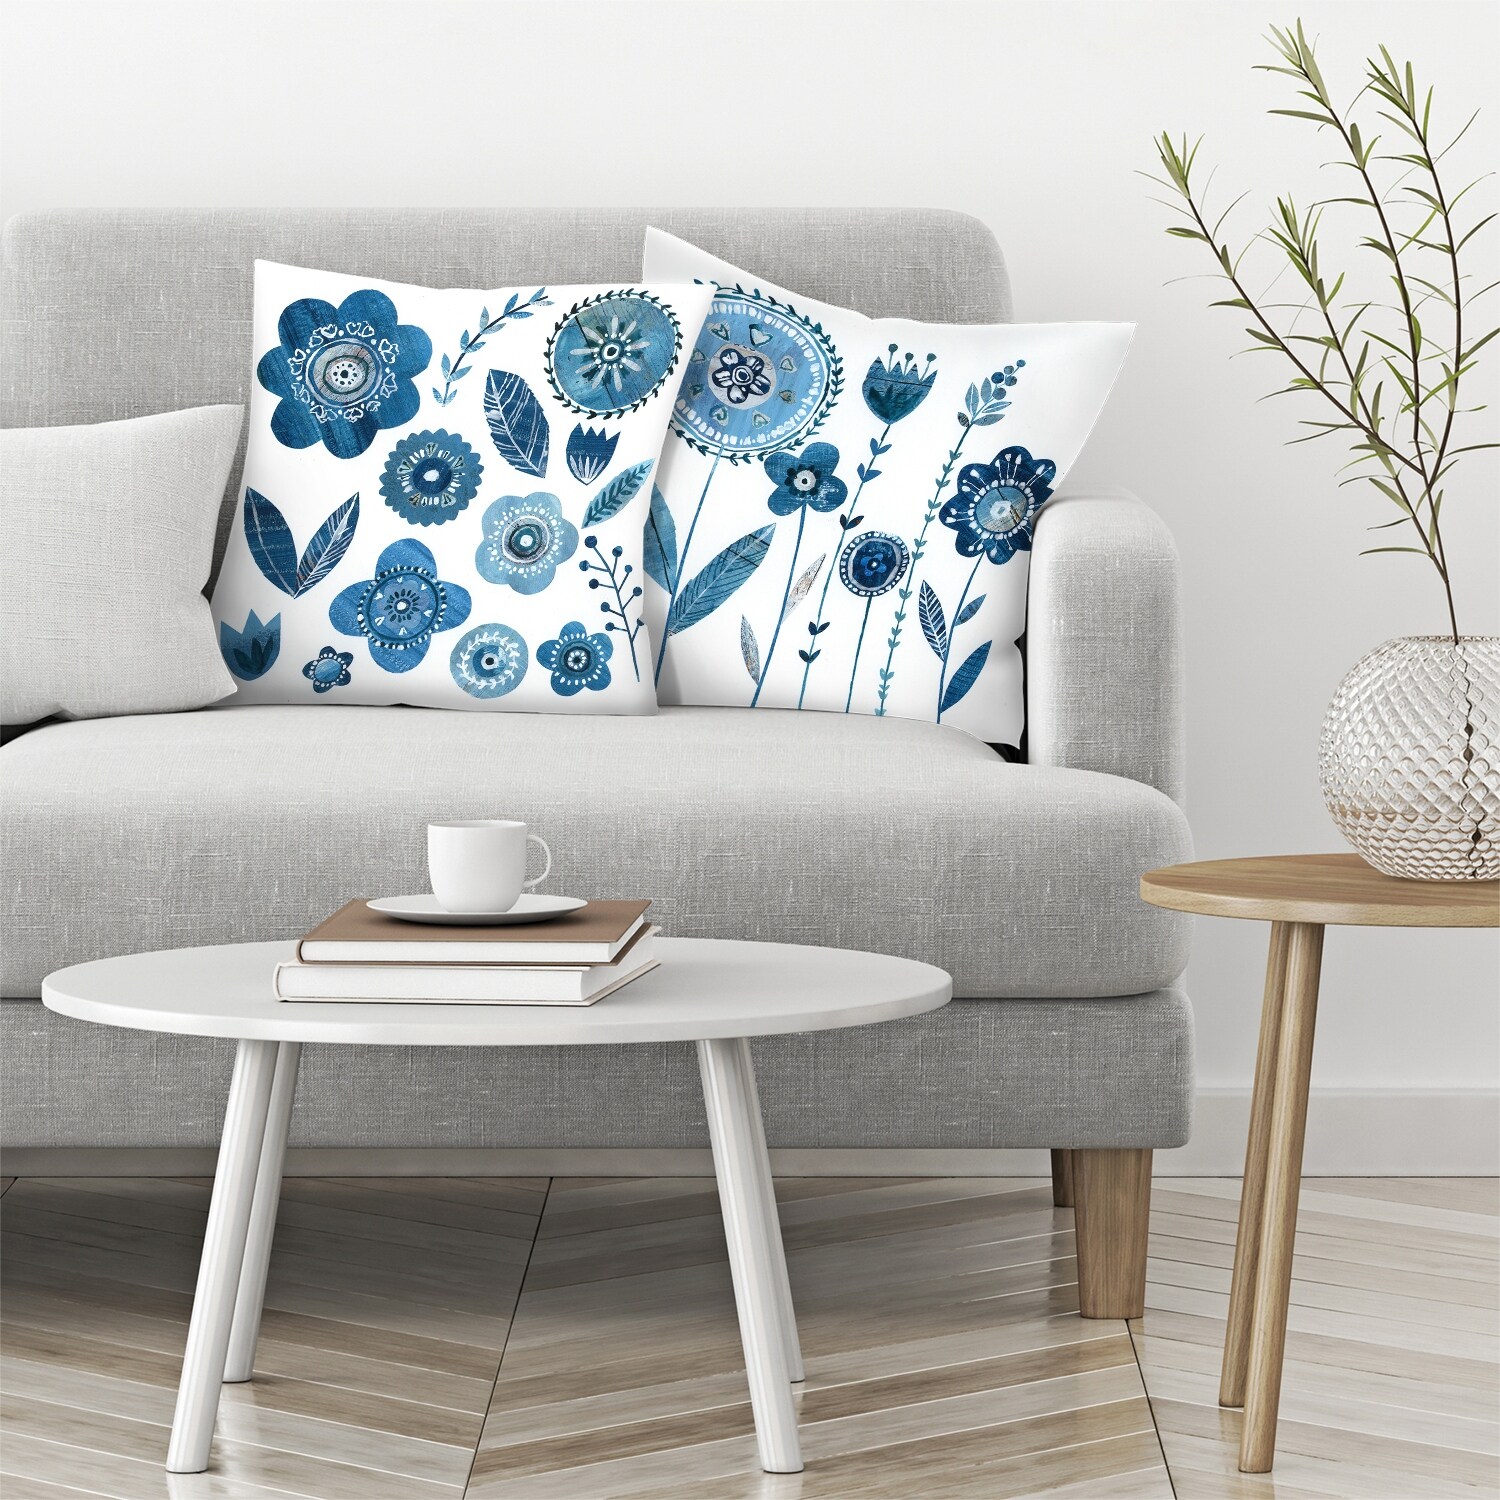 Blue Flowers With Stems and Blue Flowers & Leaves - Set of 2 Decorative Pillows